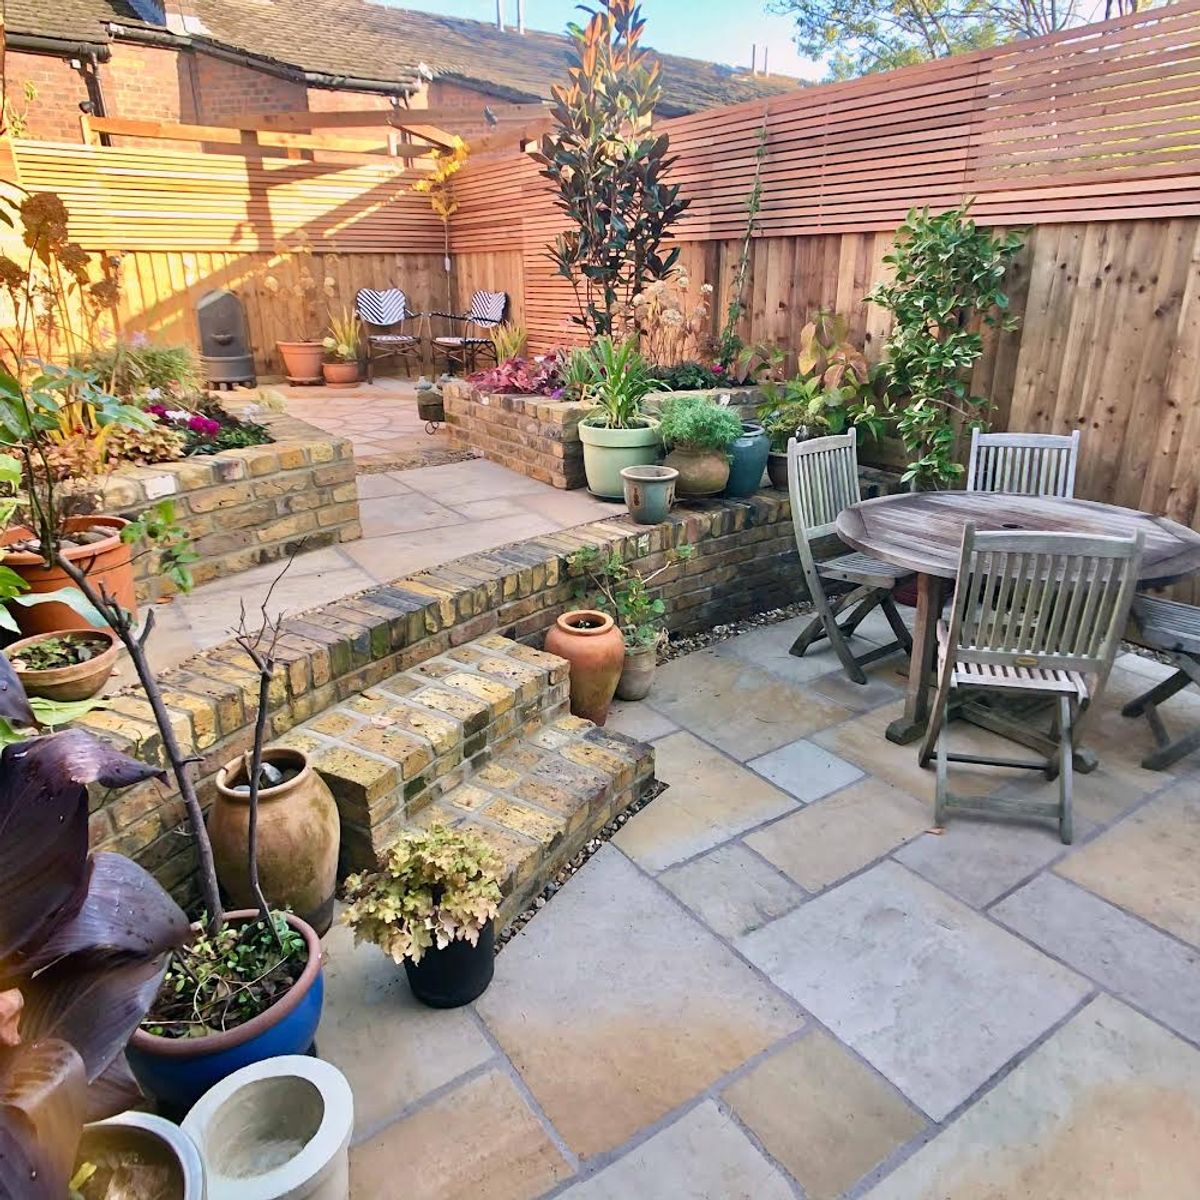 Clever Back Yard Design in Dalston North London Creating a Small Beautiful Garden with Different Levels Split by Brick Retaining Wall